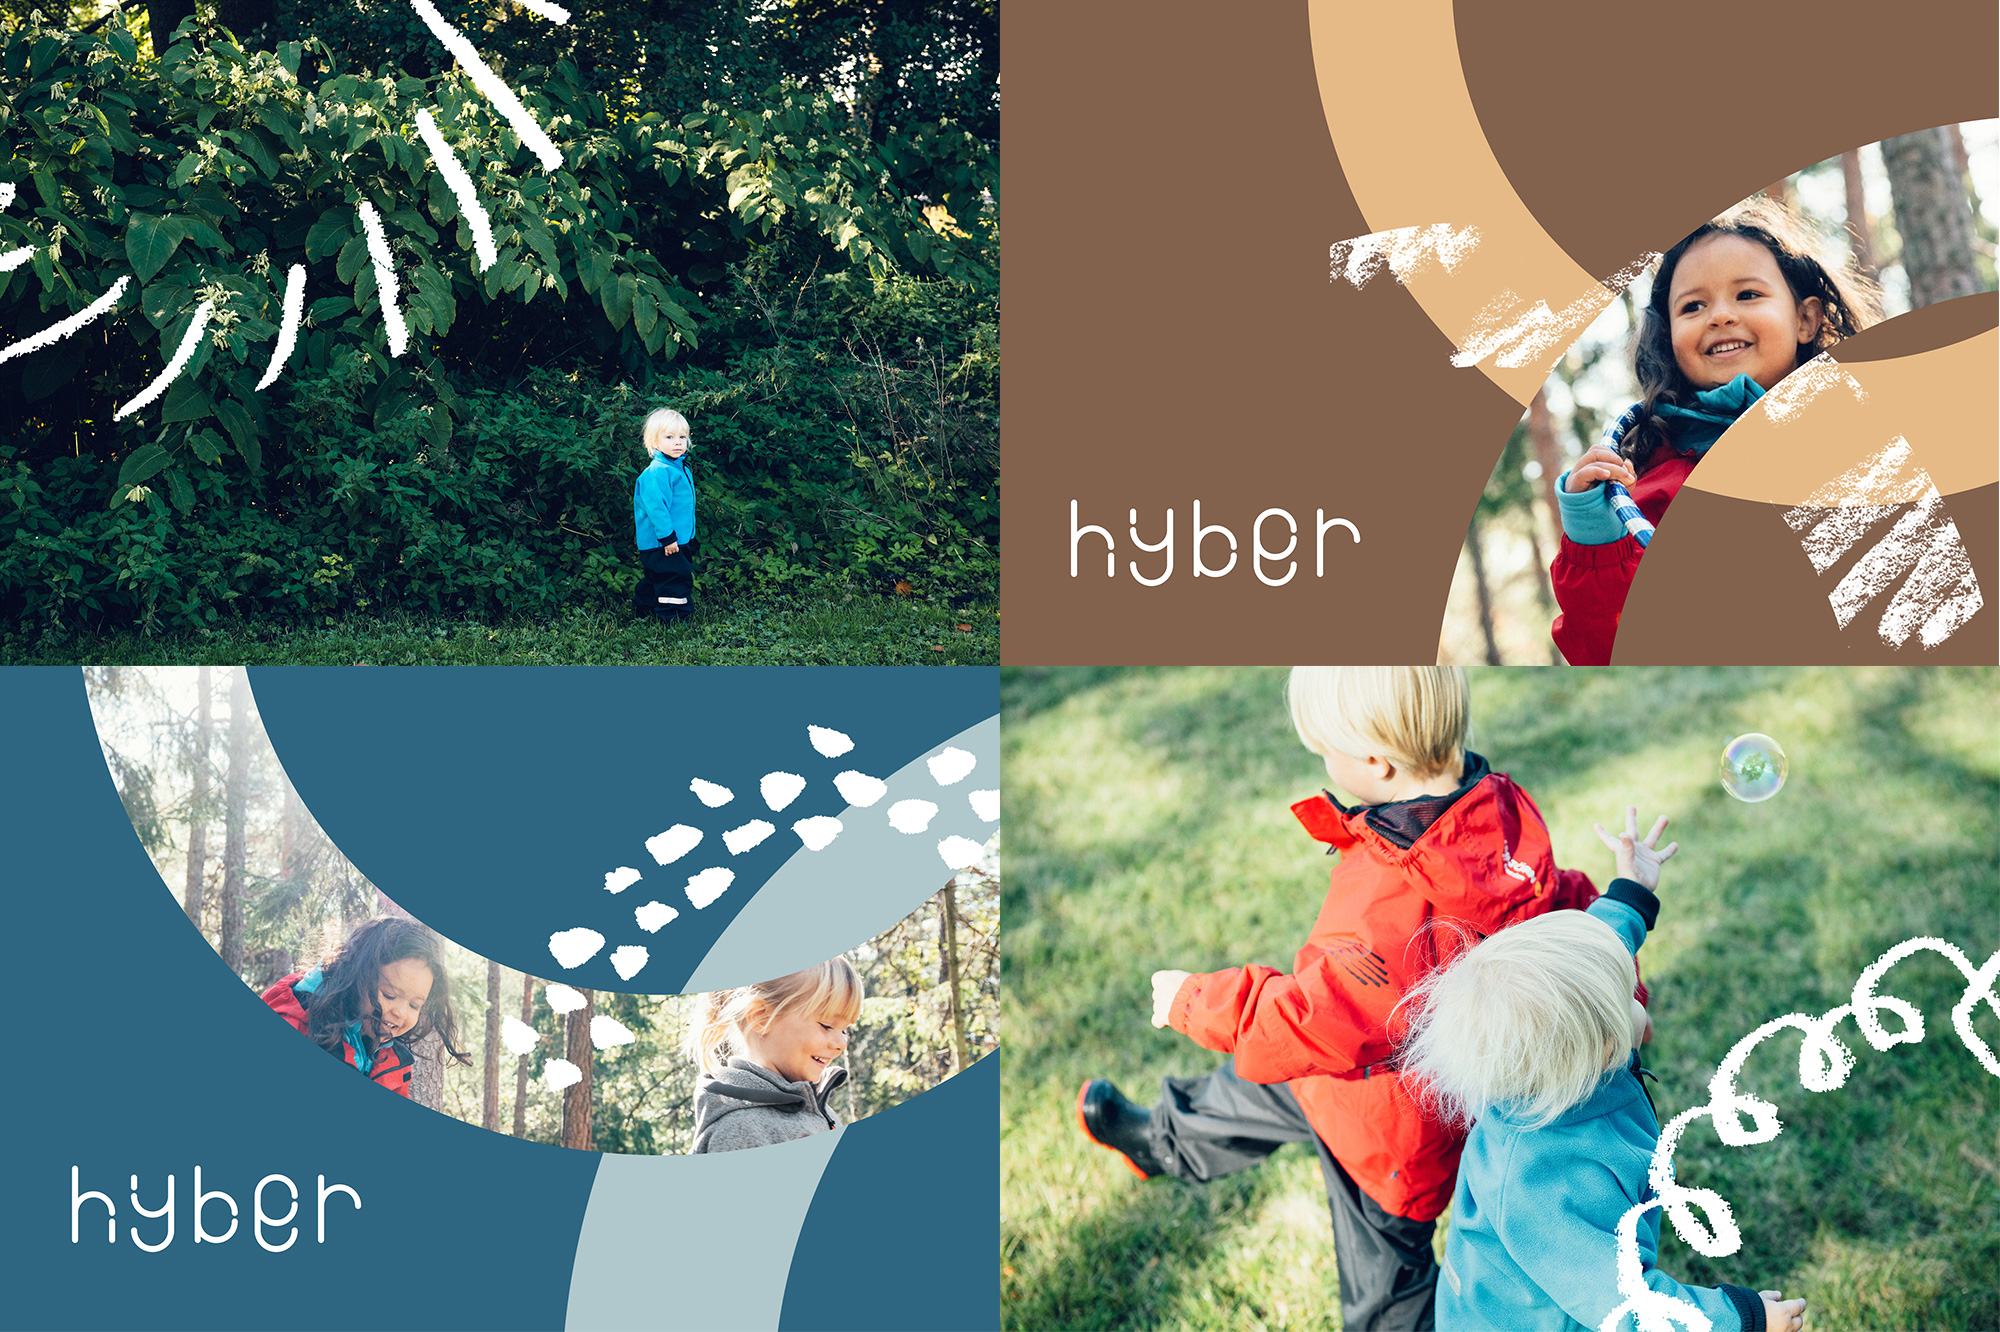 New Logo and Identity for Hyber by Bedow